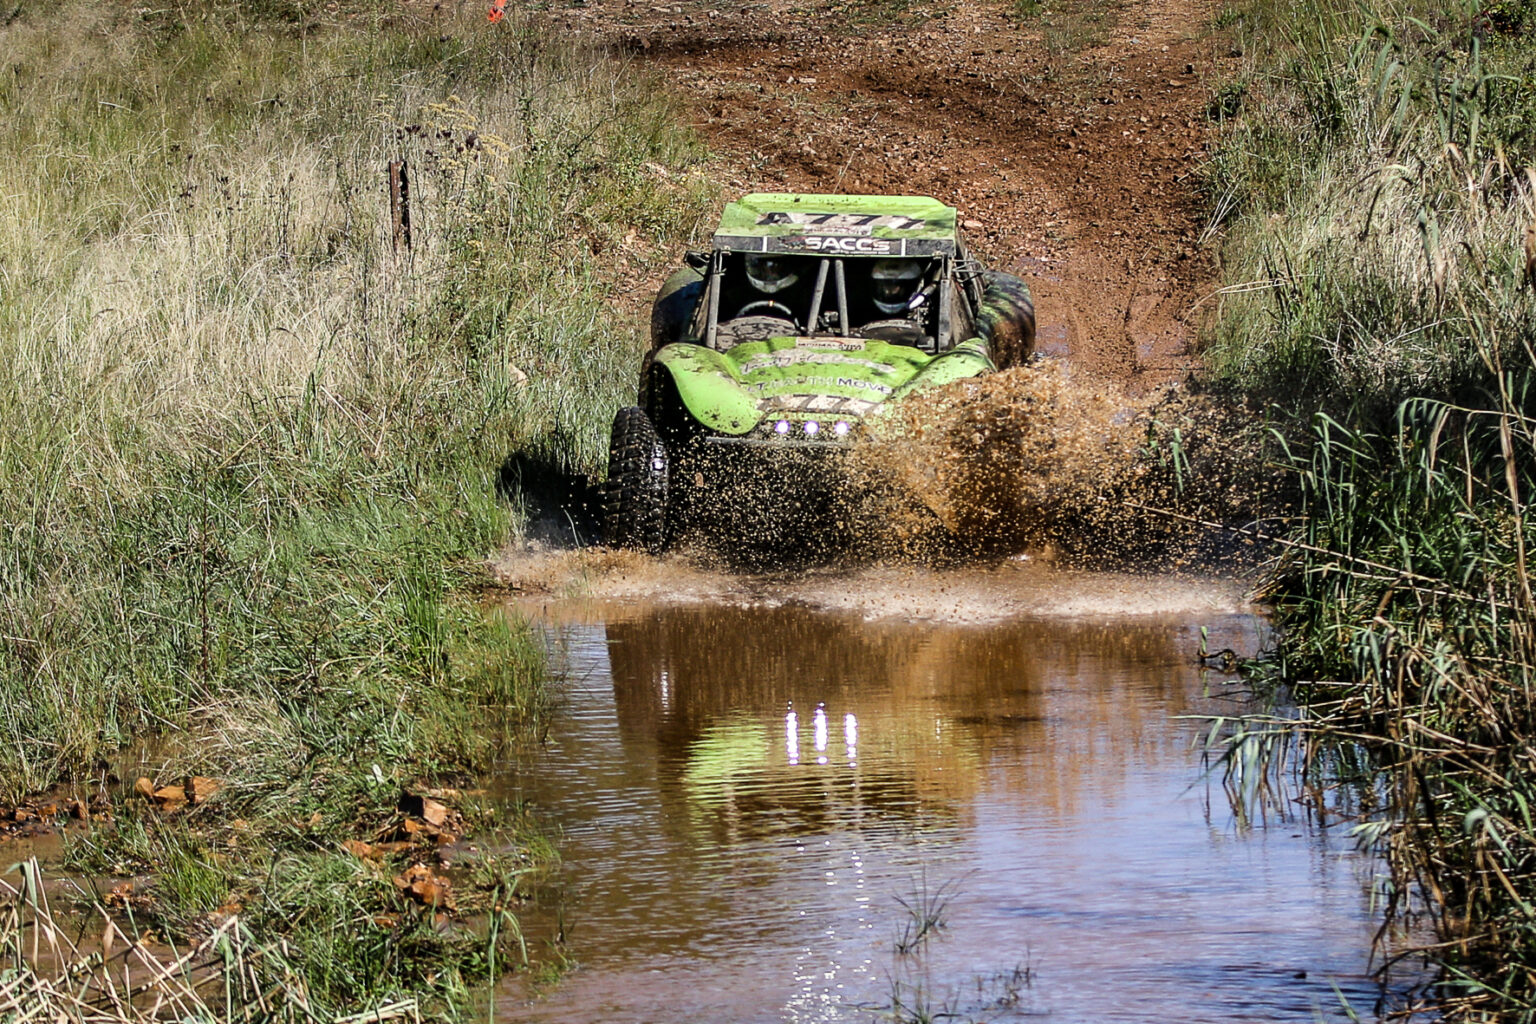 Former champions win as tough Mpumalanga 400 took its toll on the special vehicles